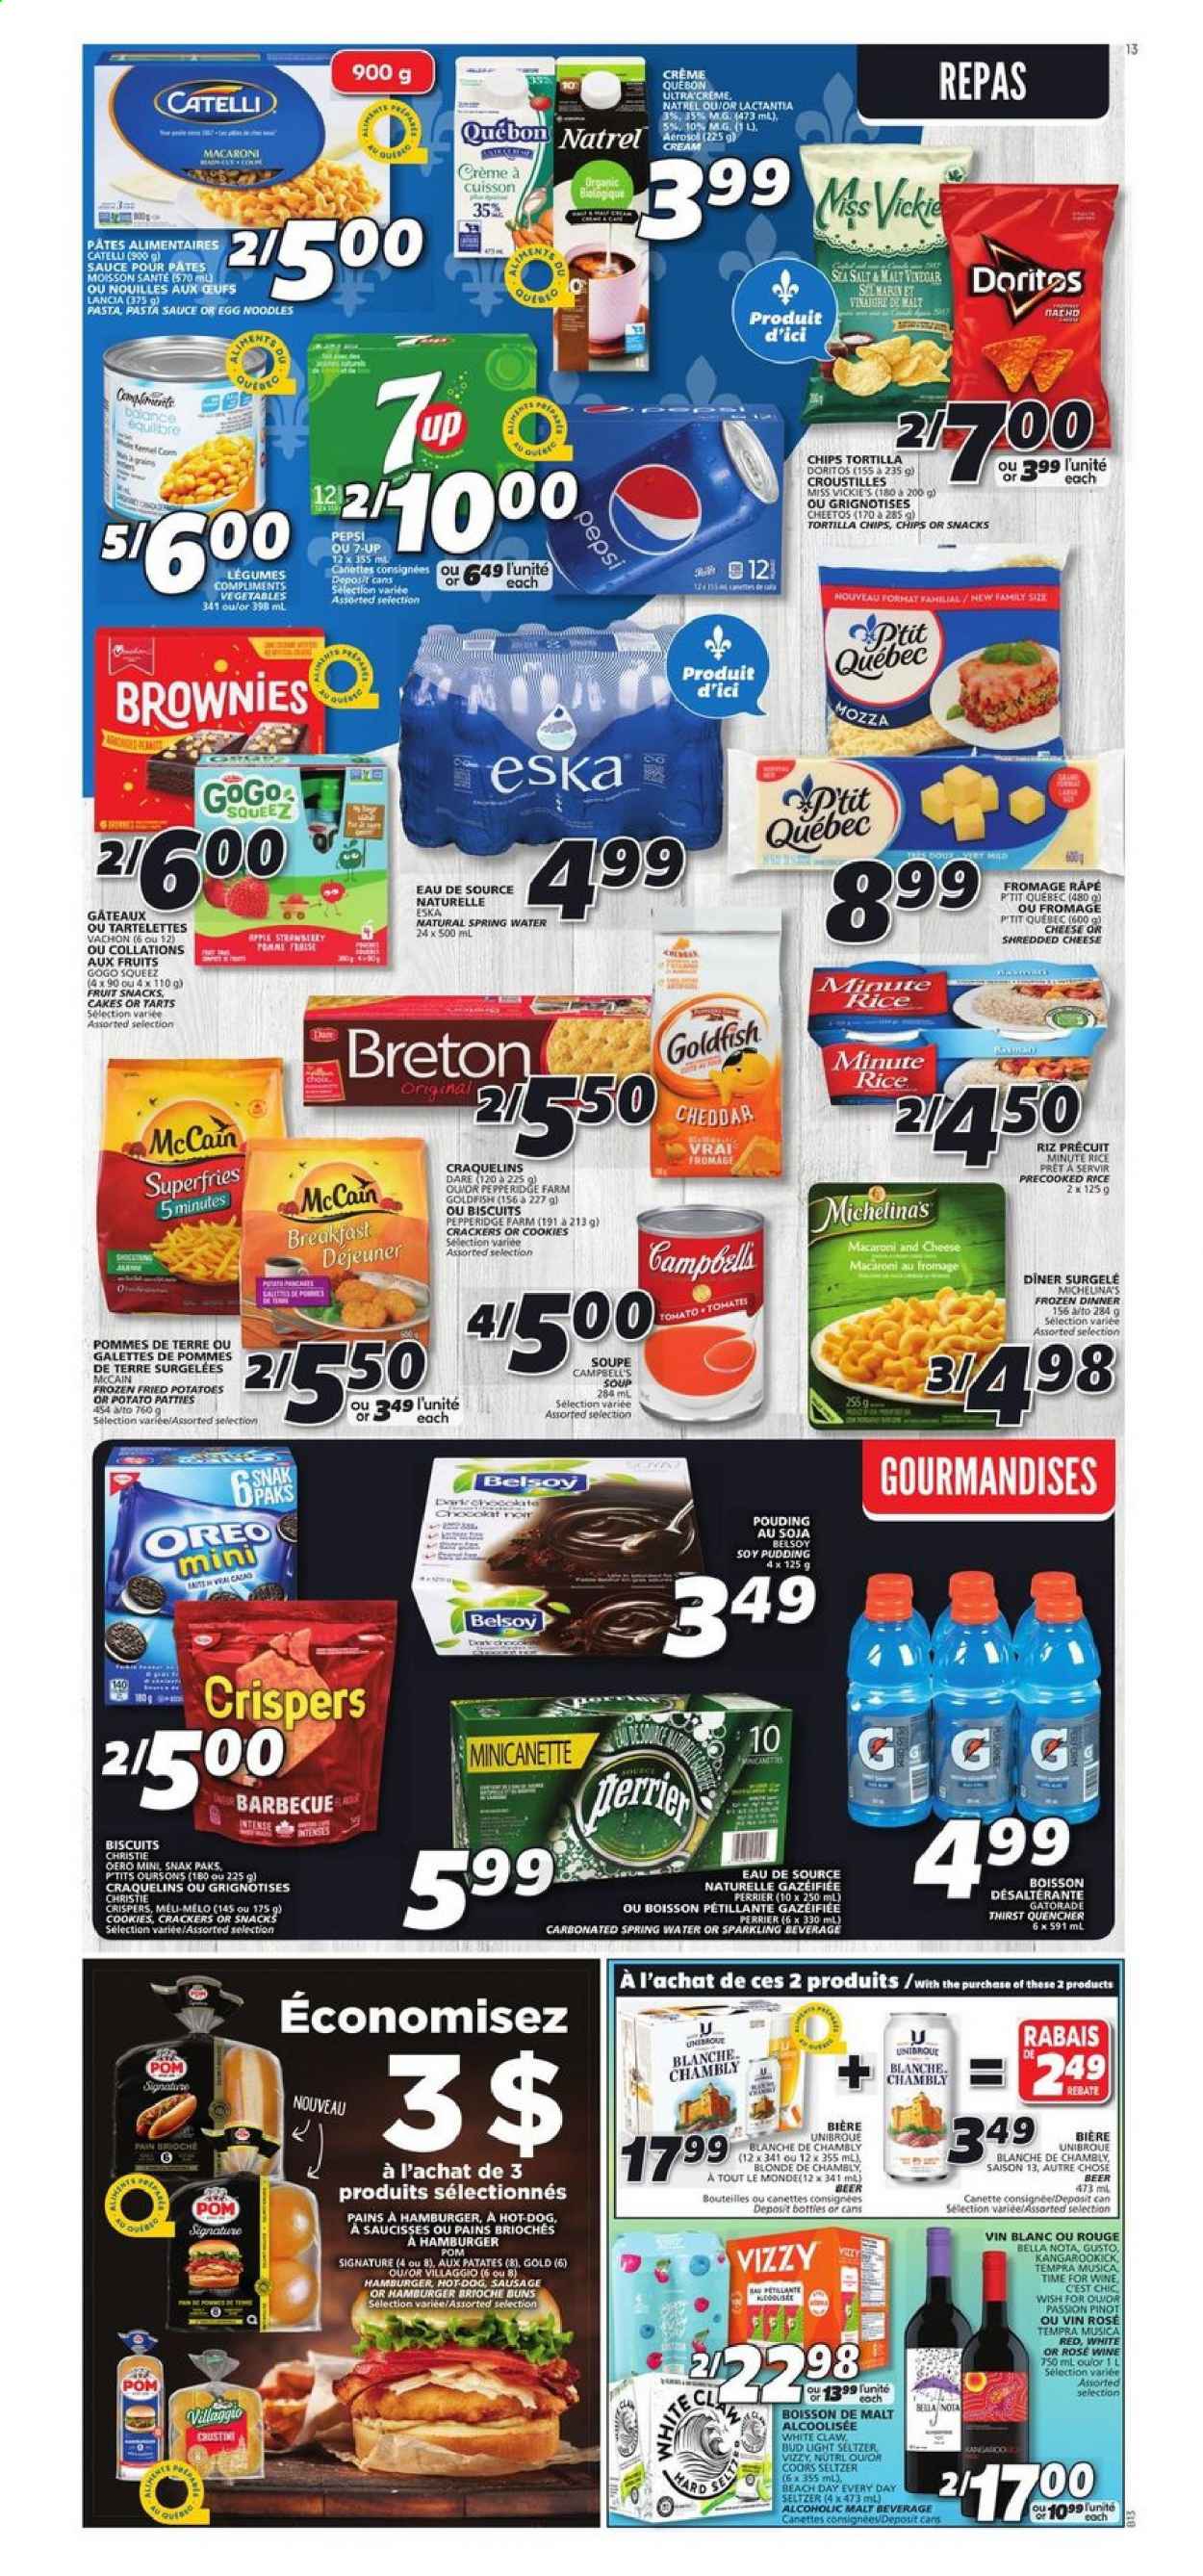 thumbnail - IGA Flyer - May 20, 2021 - May 26, 2021 - Sales products - cake, buns, brioche, brownies, Bella, potatoes, Campbell's, macaroni & cheese, pasta sauce, soup, hamburger, sausage, shredded cheese, pudding, Oreo, McCain, potato fries, cookies, crackers, biscuit, fruit snack, Doritos, tortilla chips, Cheetos, Goldfish, malt, rice, Pepsi, 7UP, Perrier, Gatorade, spring water, rosé wine, White Claw, Hard Seltzer, beer, Coors, Bud Light. Page 11.